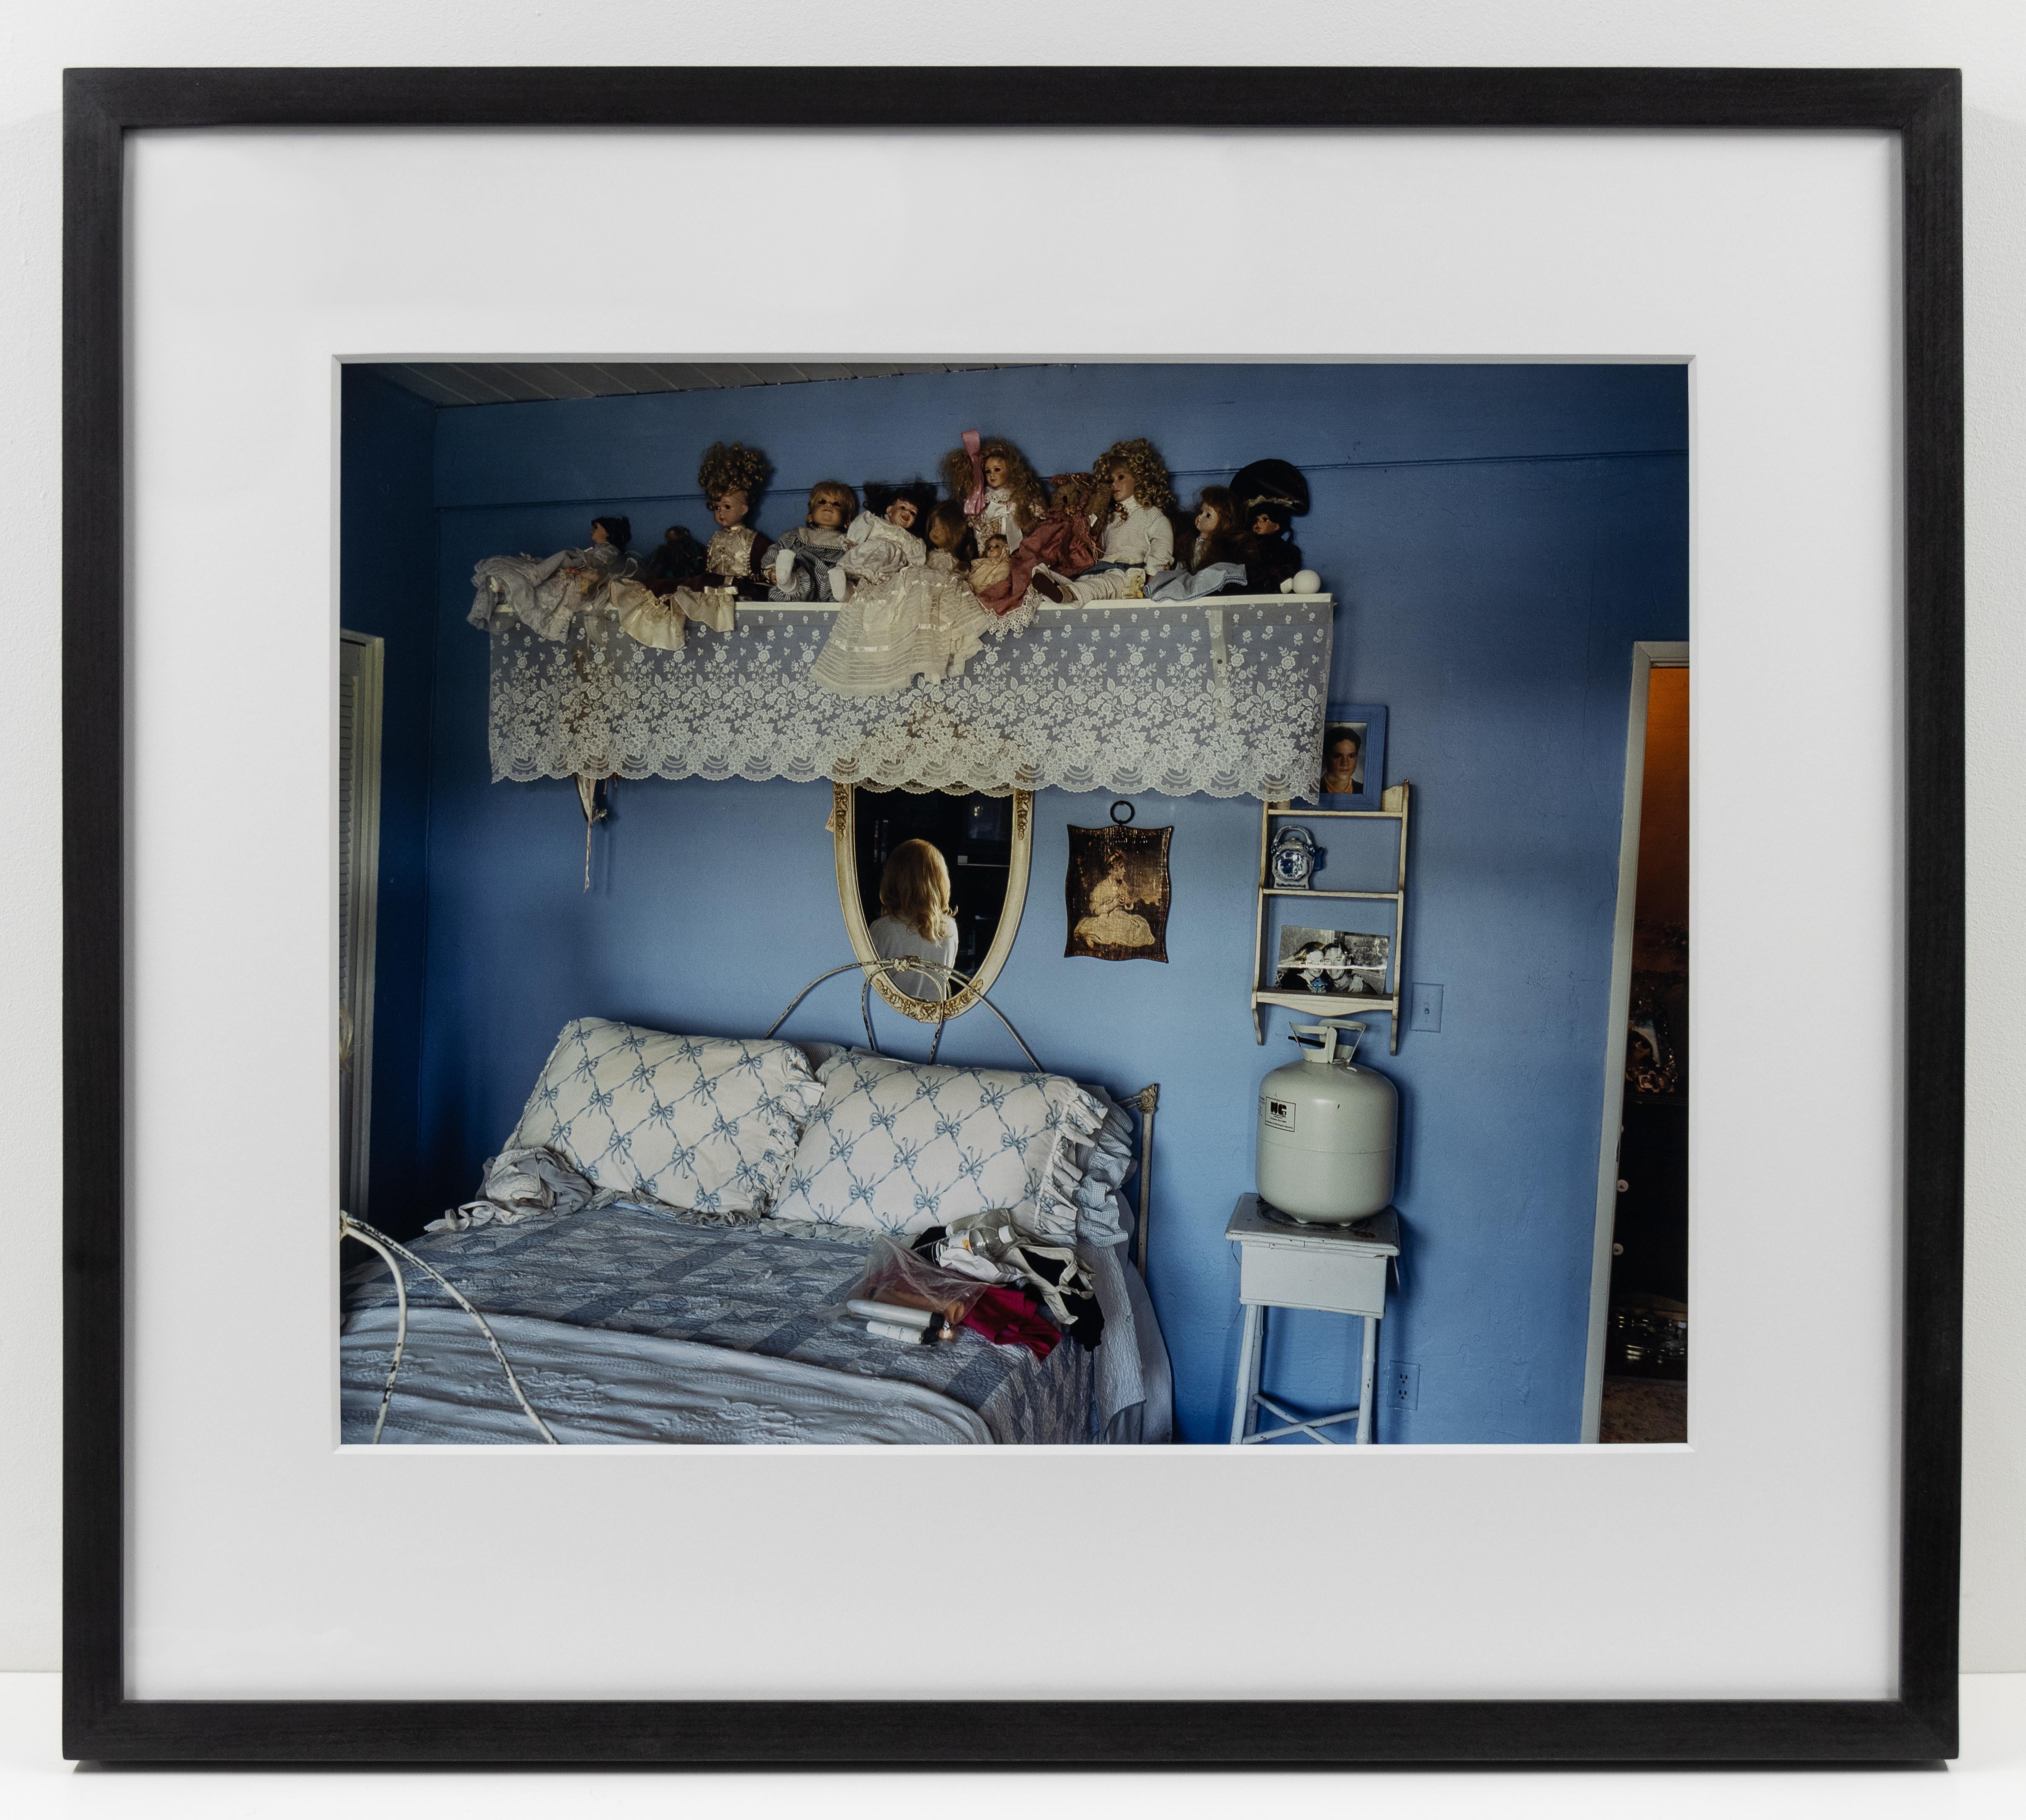 Child's Bedroom - Contemporary Photograph by Larry Sultan